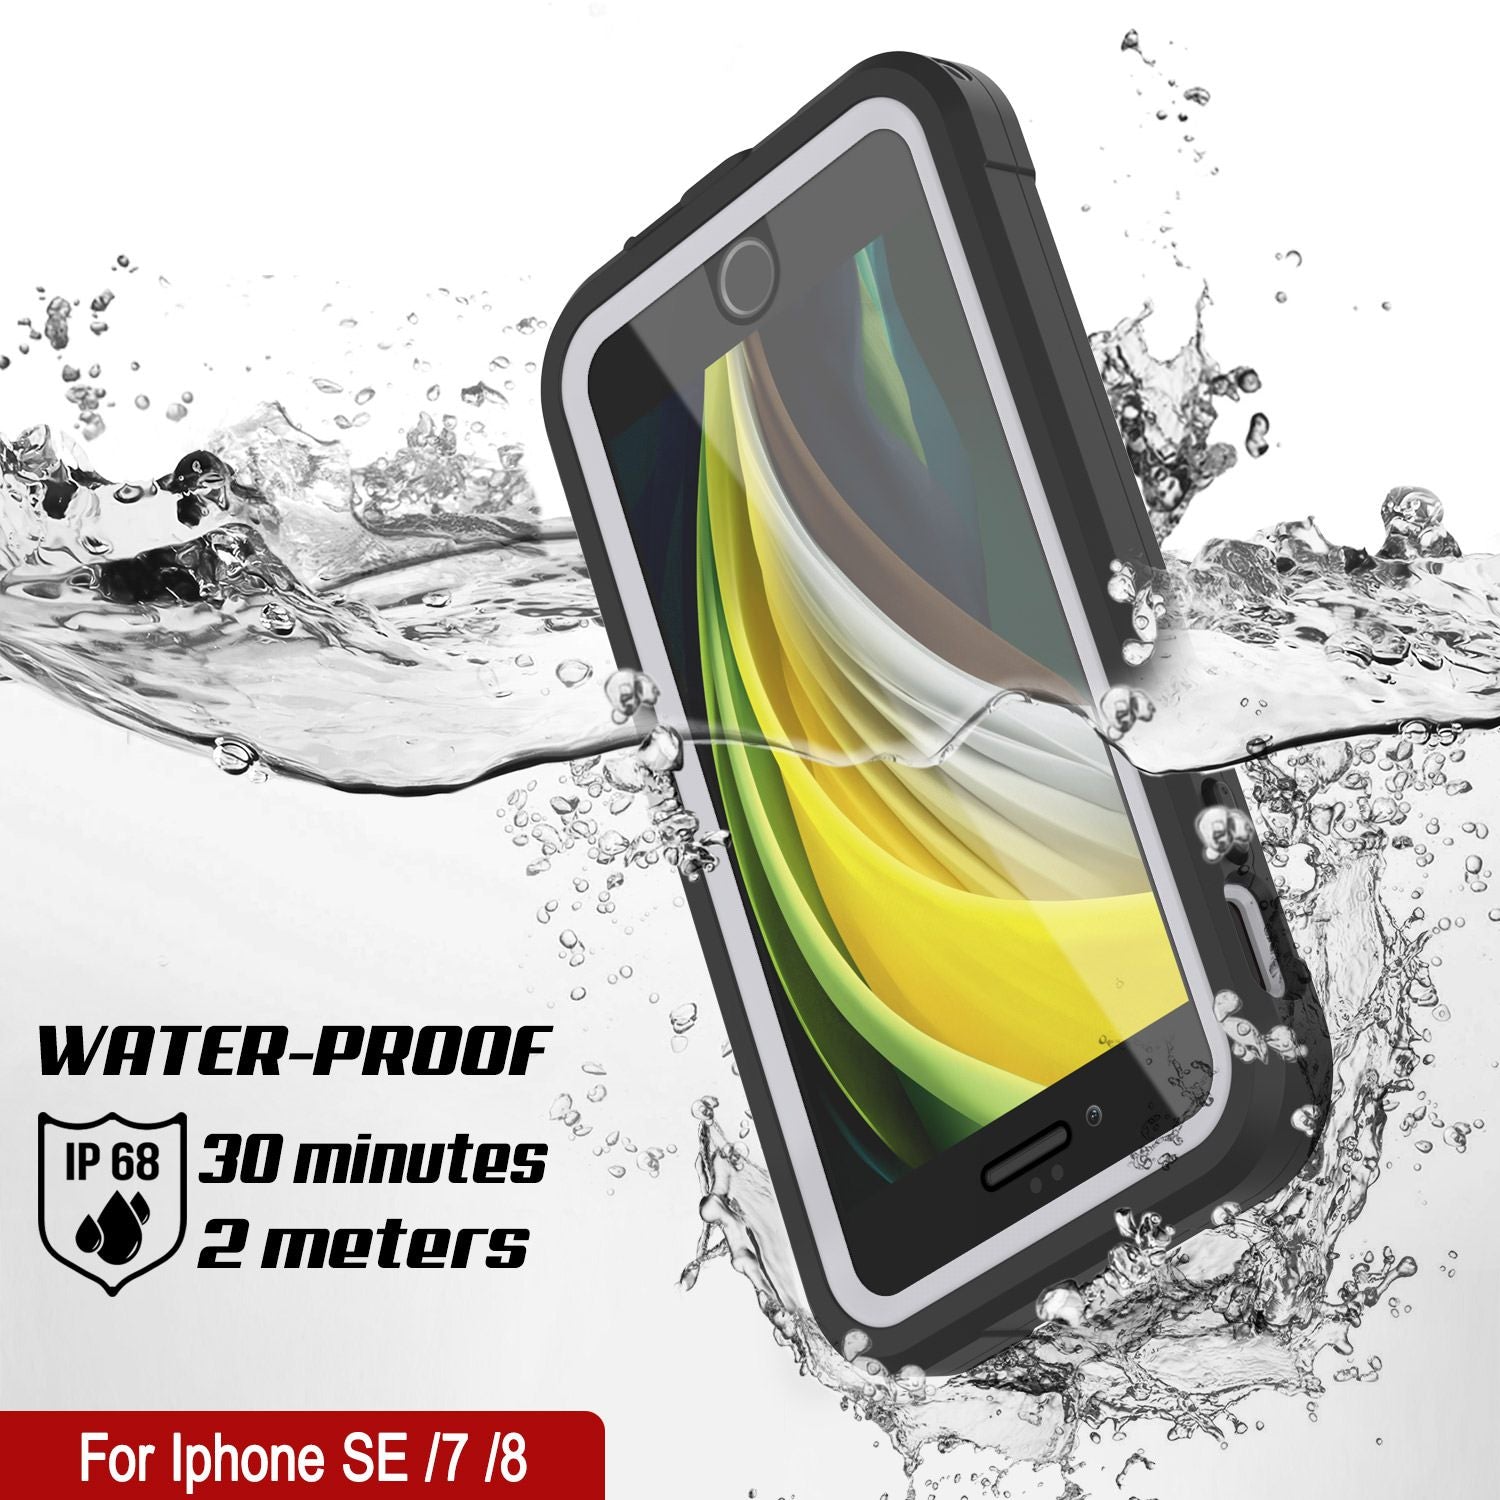 iPhone 7 Waterproof IP68 Case, Punkcase [white]  [Maximus Series] [Slim Fit] [IP68 Certified] [Shockresistant] Clear Armor Cover with Screen Protector | Ultimate Protection